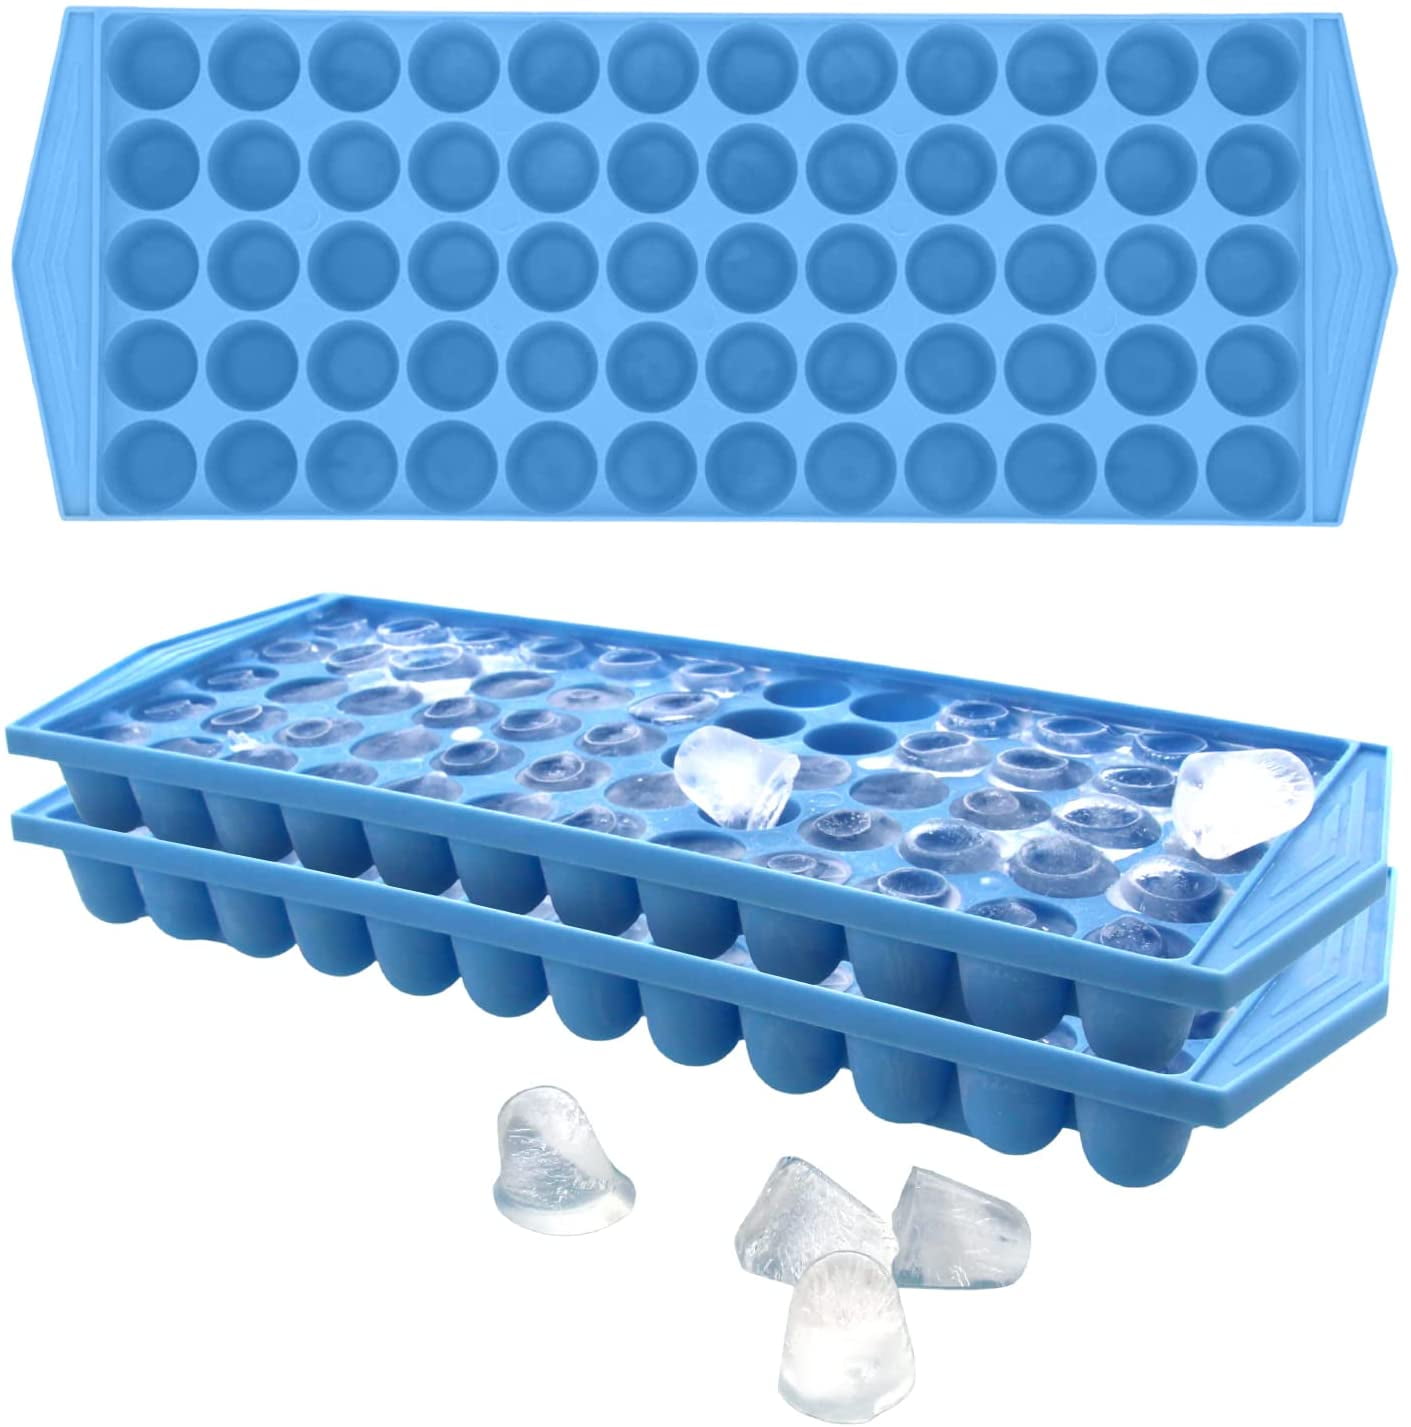 Prime-Line Standard Plastic Ice Cube Trays (2-Pack) MP10863 - The